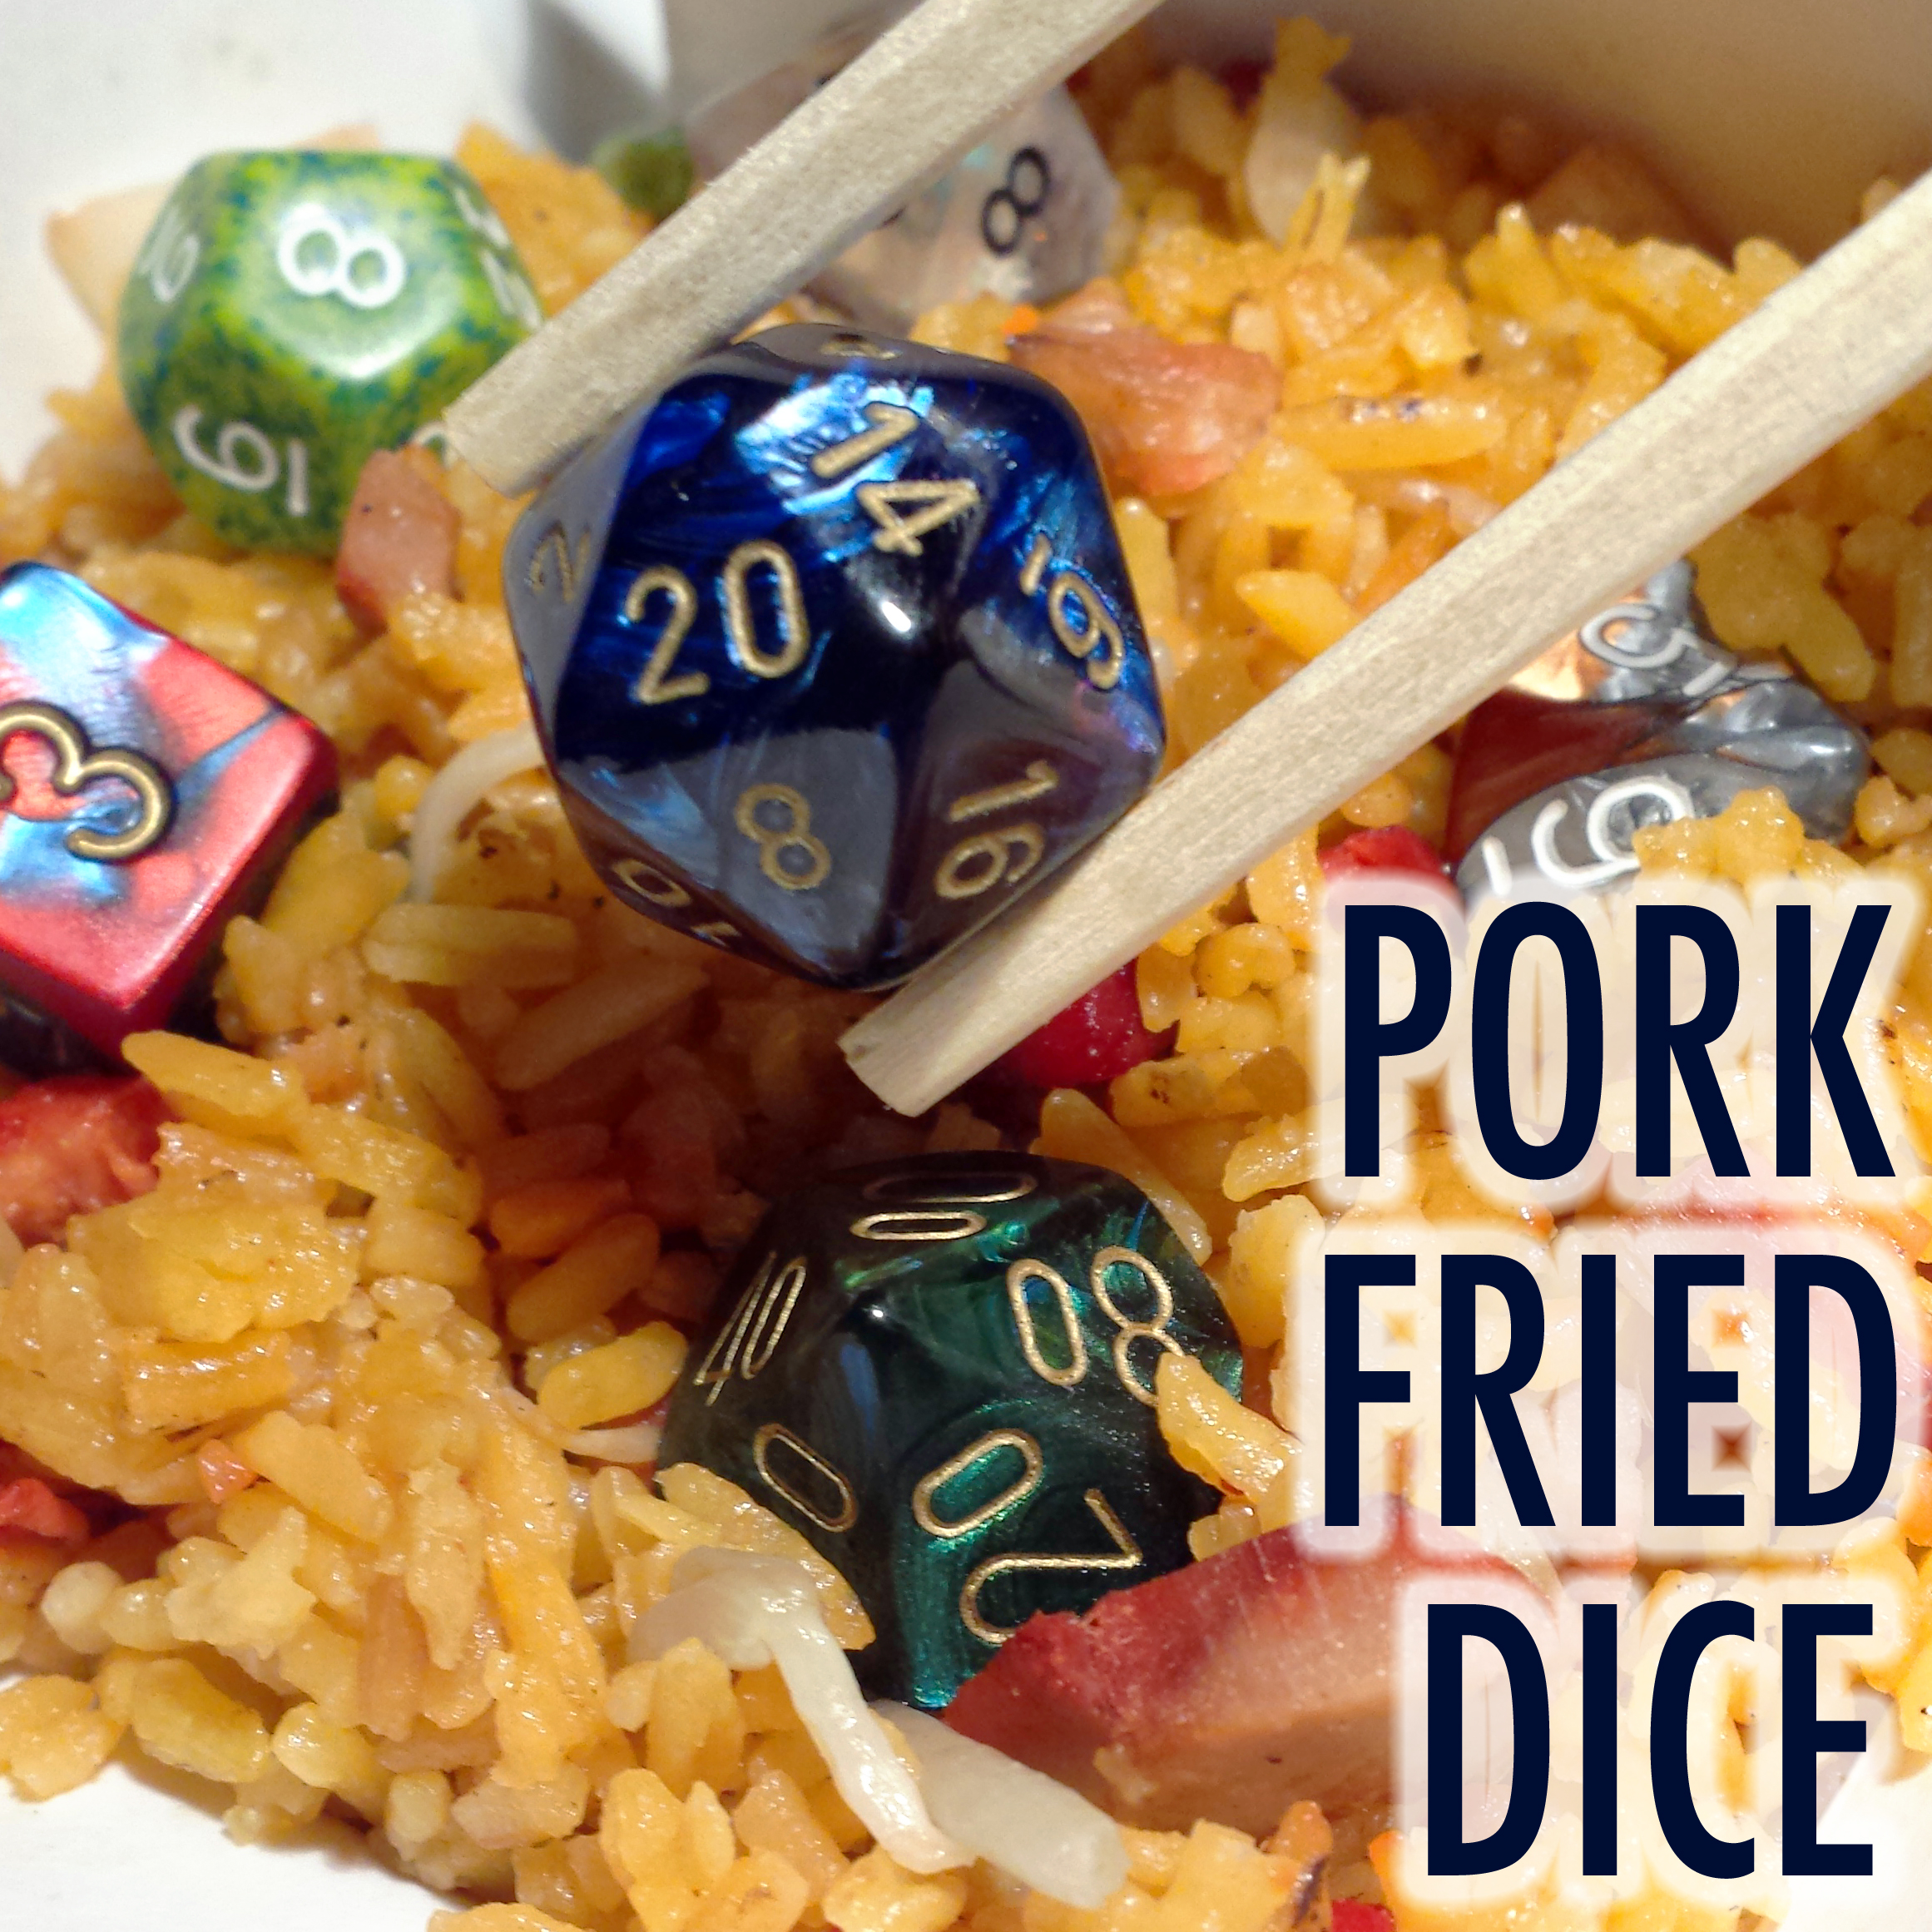 182: The Number One Unspoken Rule of Pork Fried Dice